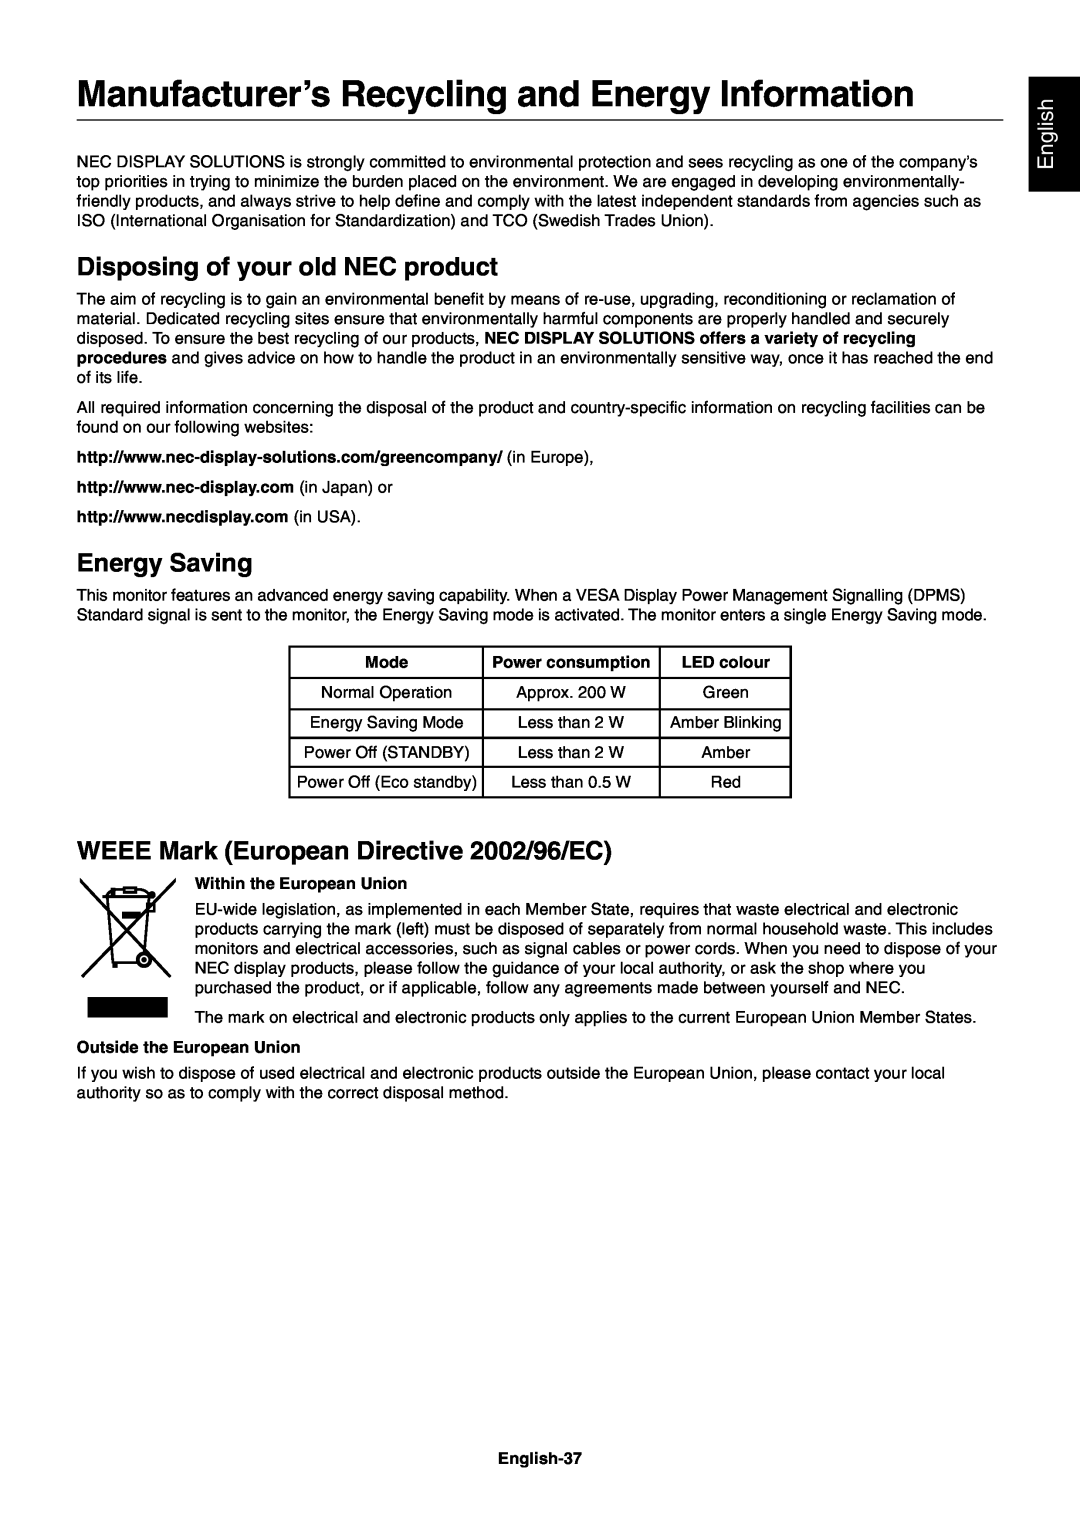 NEC X461UN Manufacturer’s Recycling and Energy Information, Disposing of your old NEC product, Energy Saving, English 